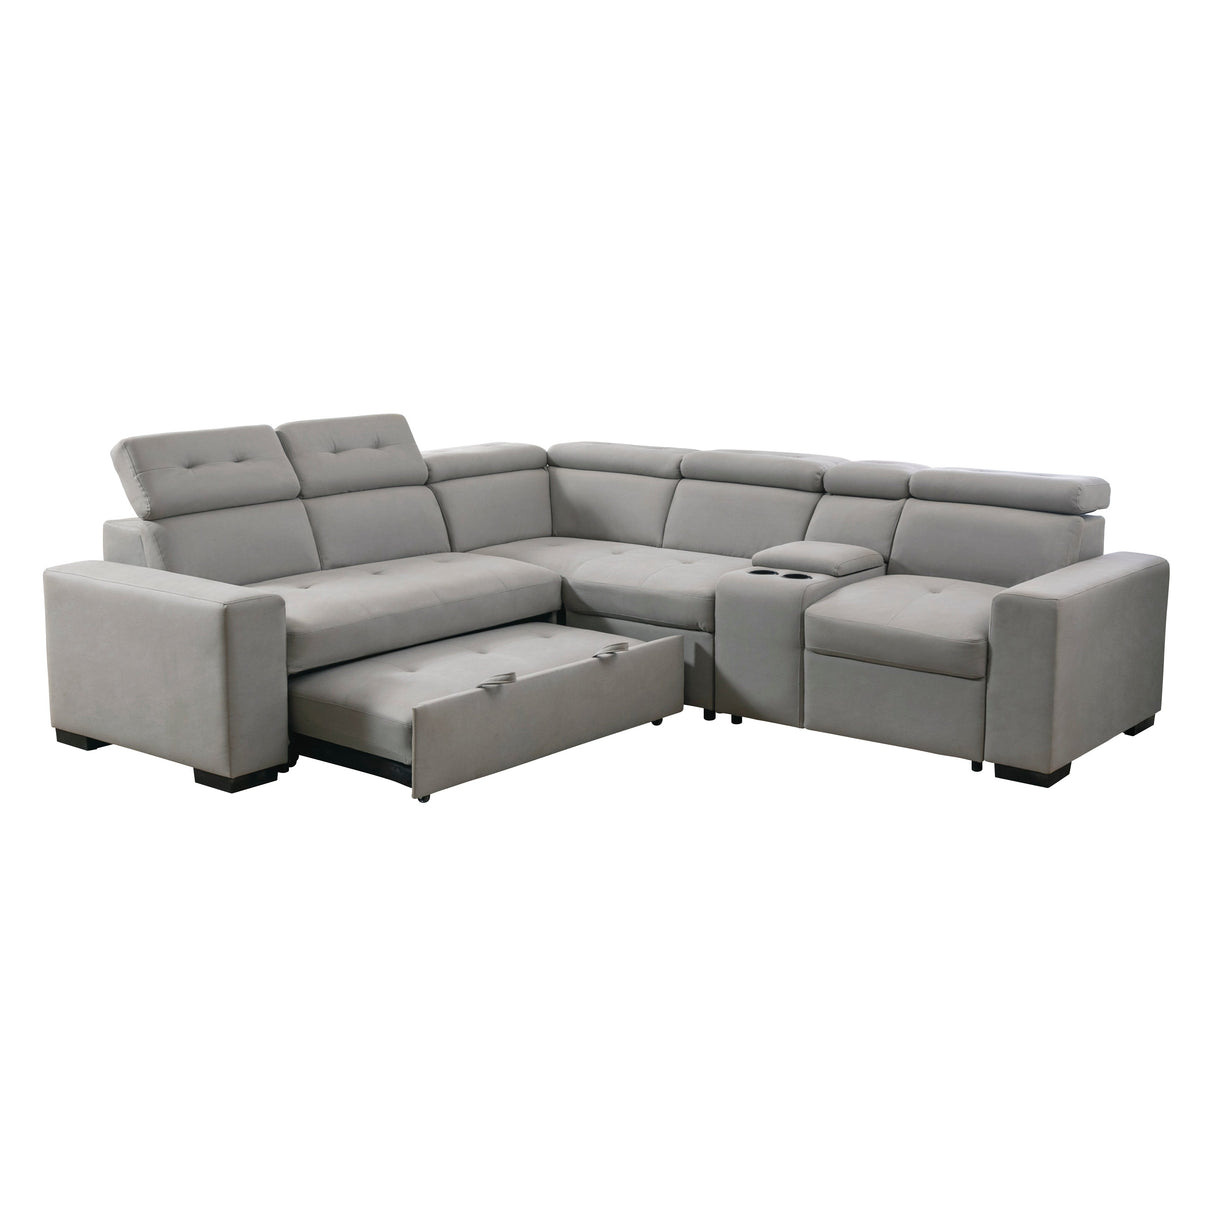 Farrah Light Gray 3-Piece Sectional with Adjustable Headrests, Pull-out Bed and Console